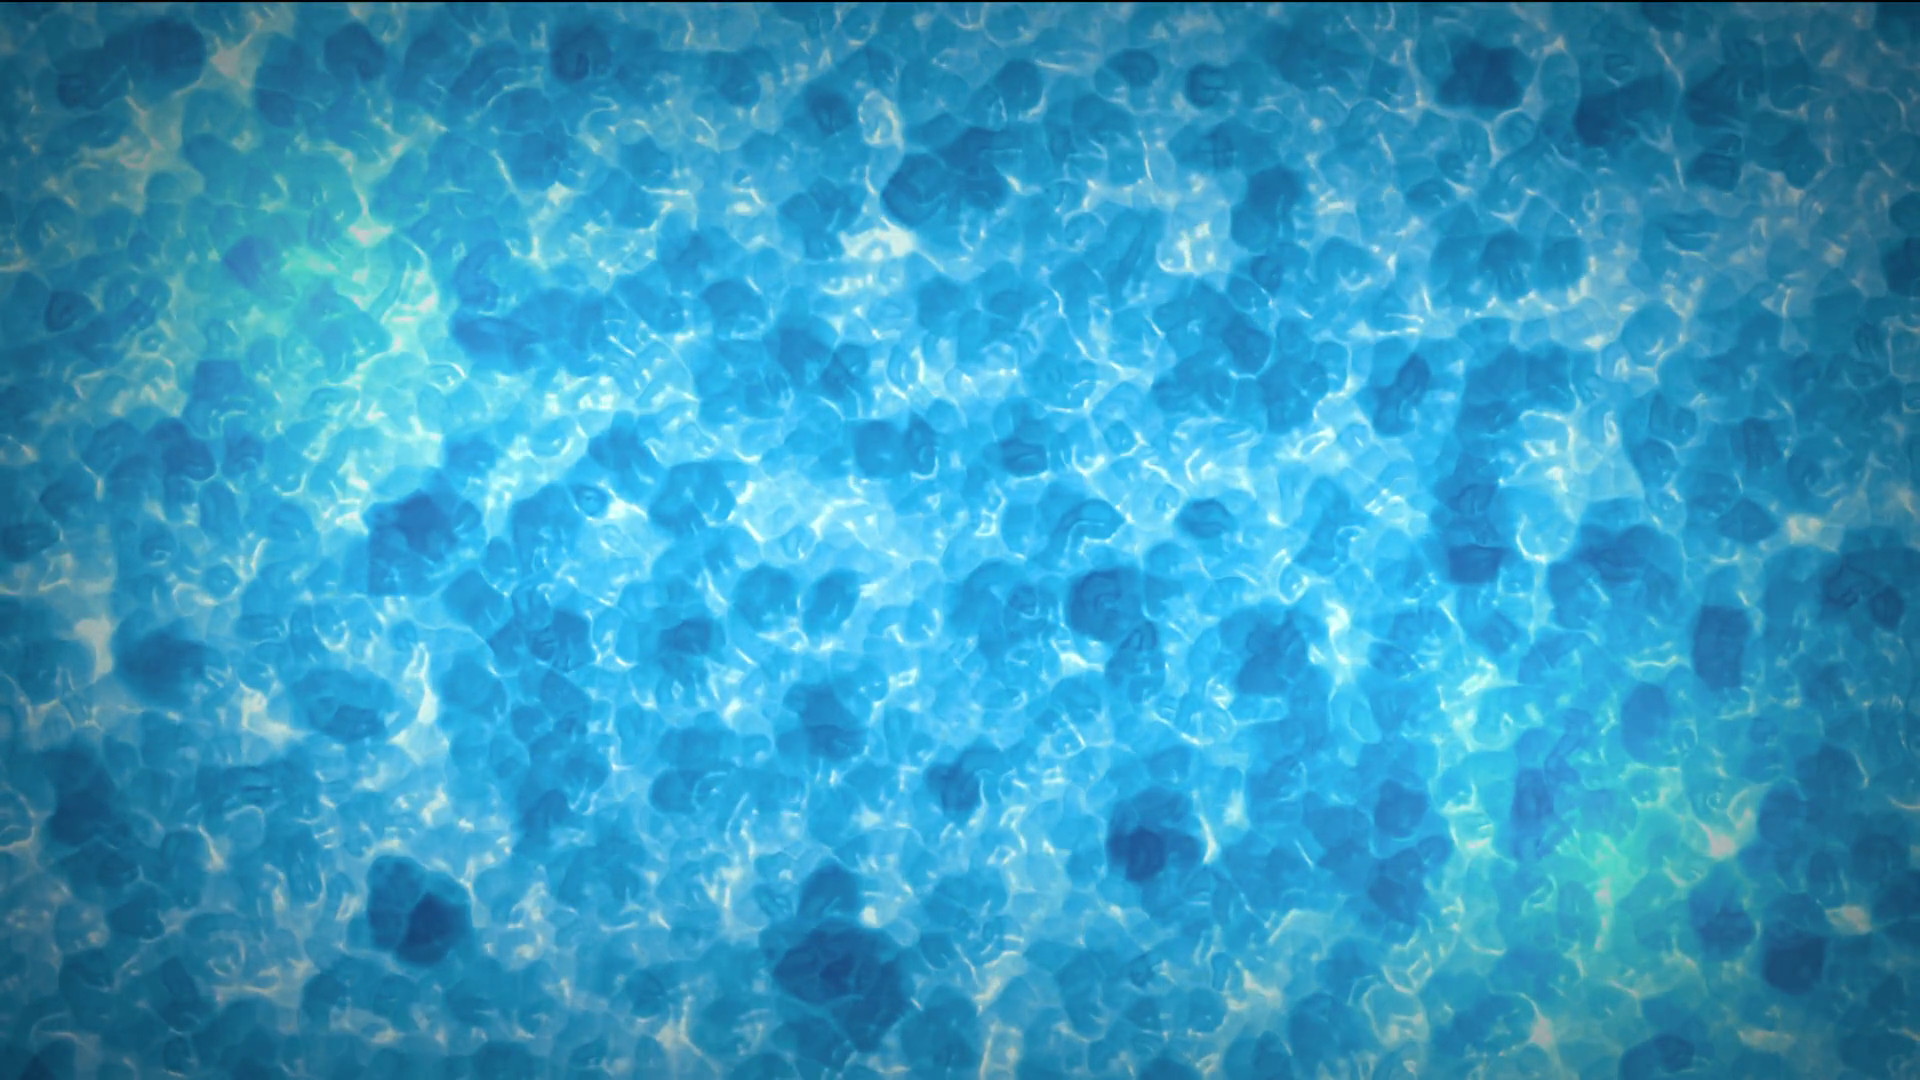 1920x1080 Seamless abstract blue surface liquid water with blurry bubble element  particle water background texture pattern. In sea water concept in 4k ultra  HD loop ...